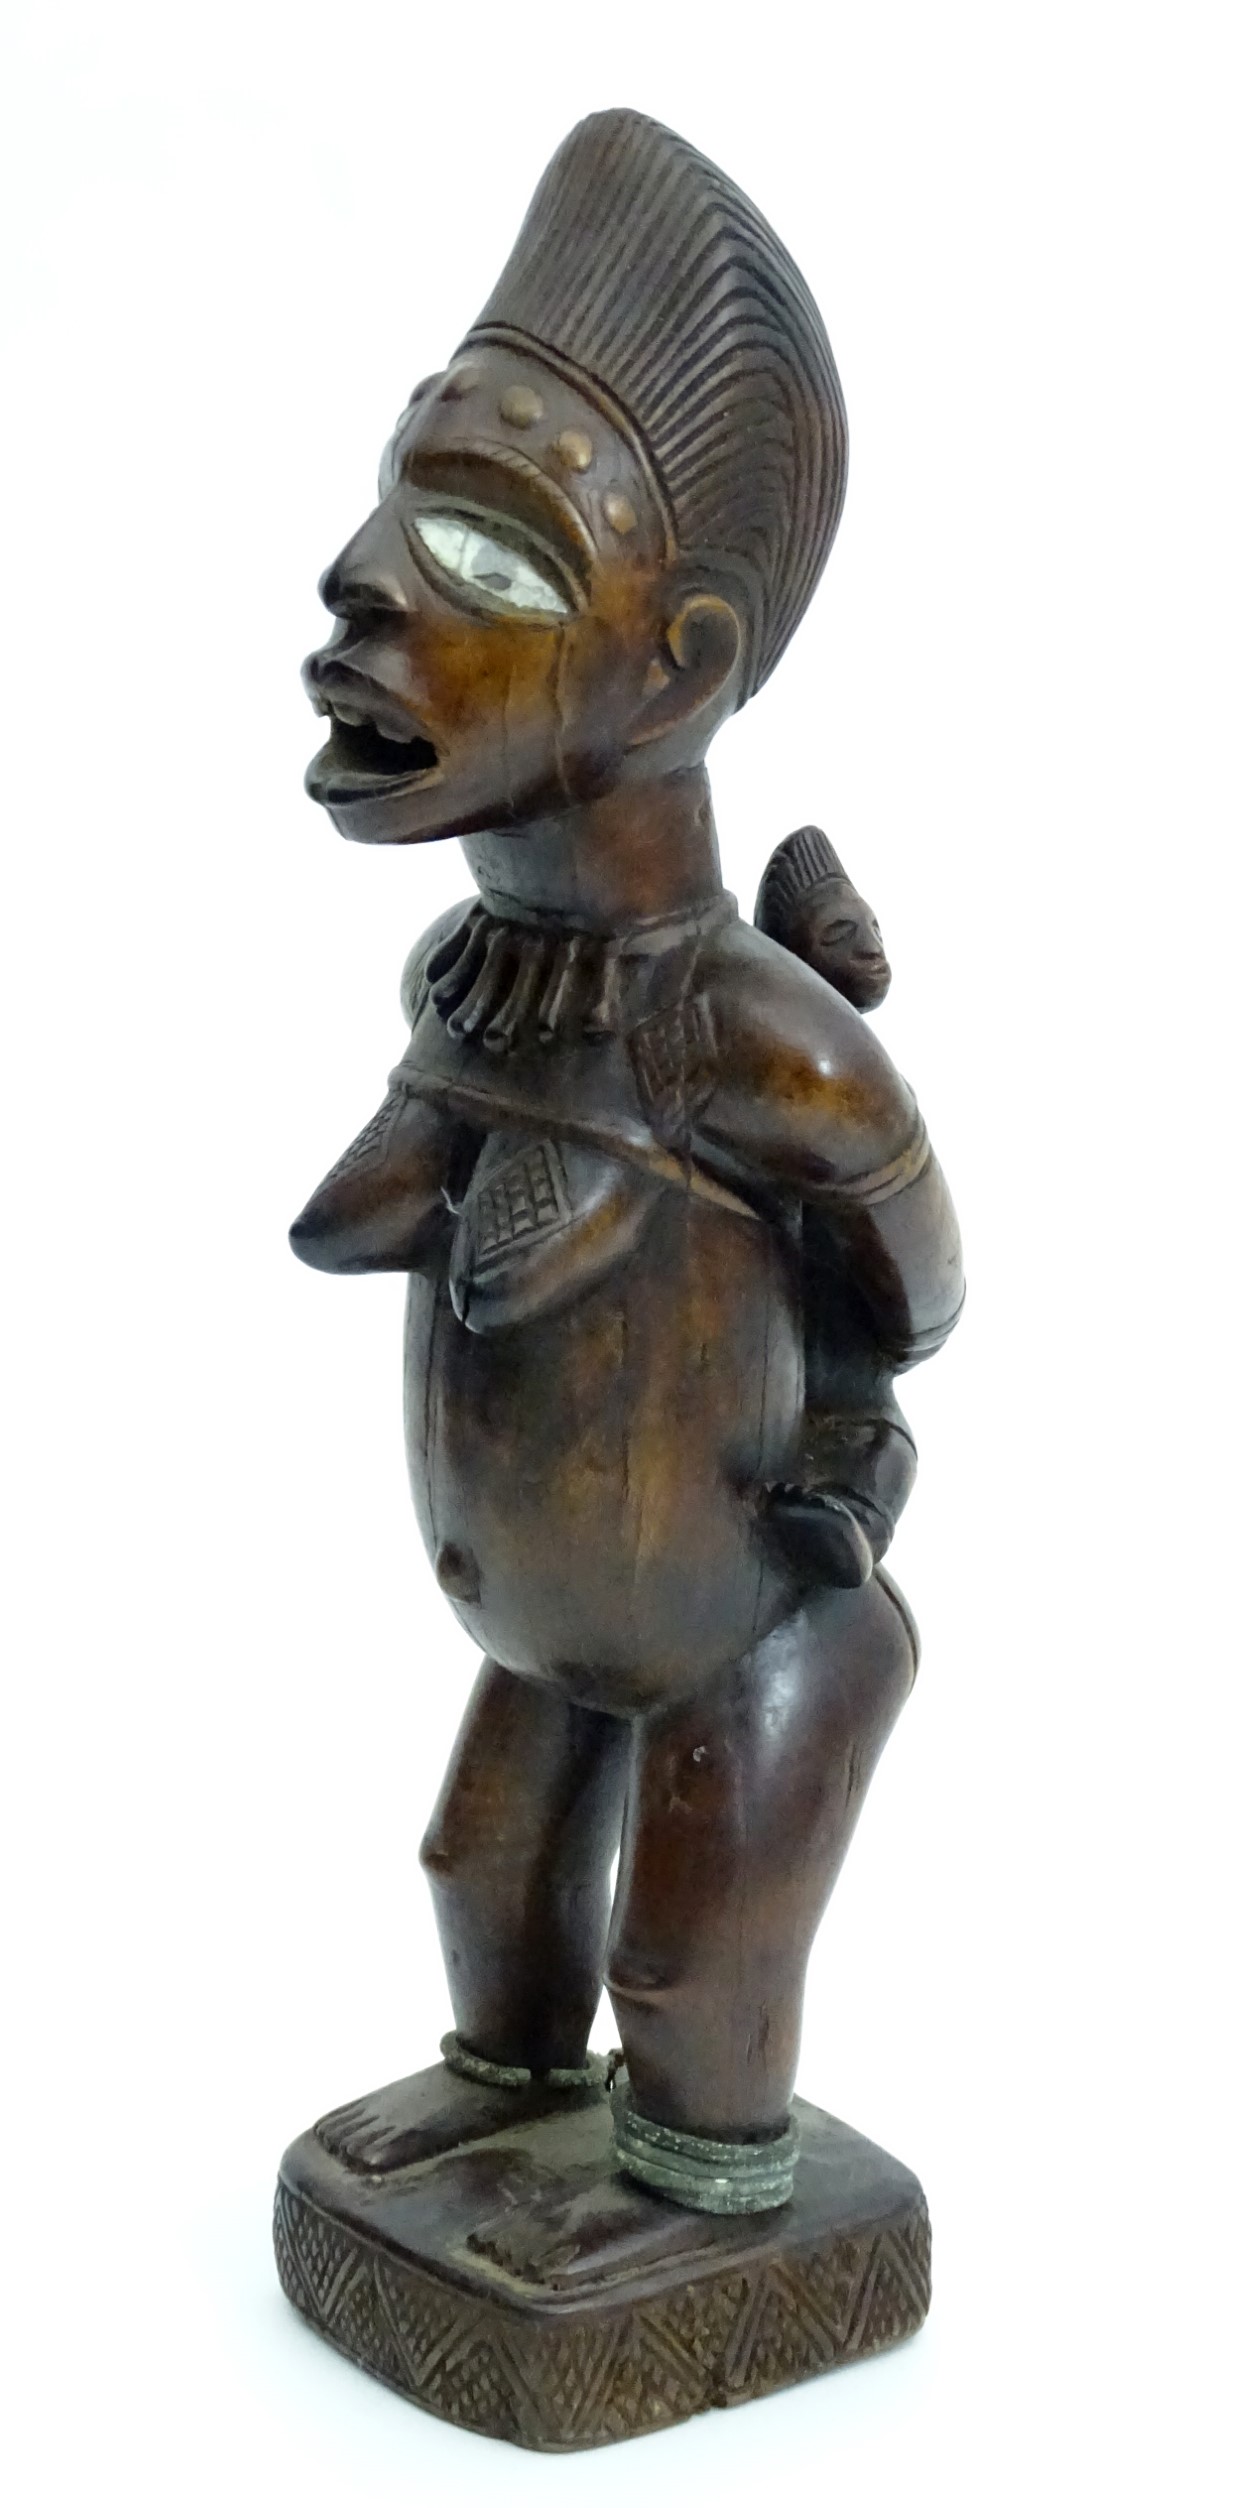 Tribal : An Ethnographic Native Tribal Kongo maternity figure. Approx. 18 1/2" high. - Image 6 of 11